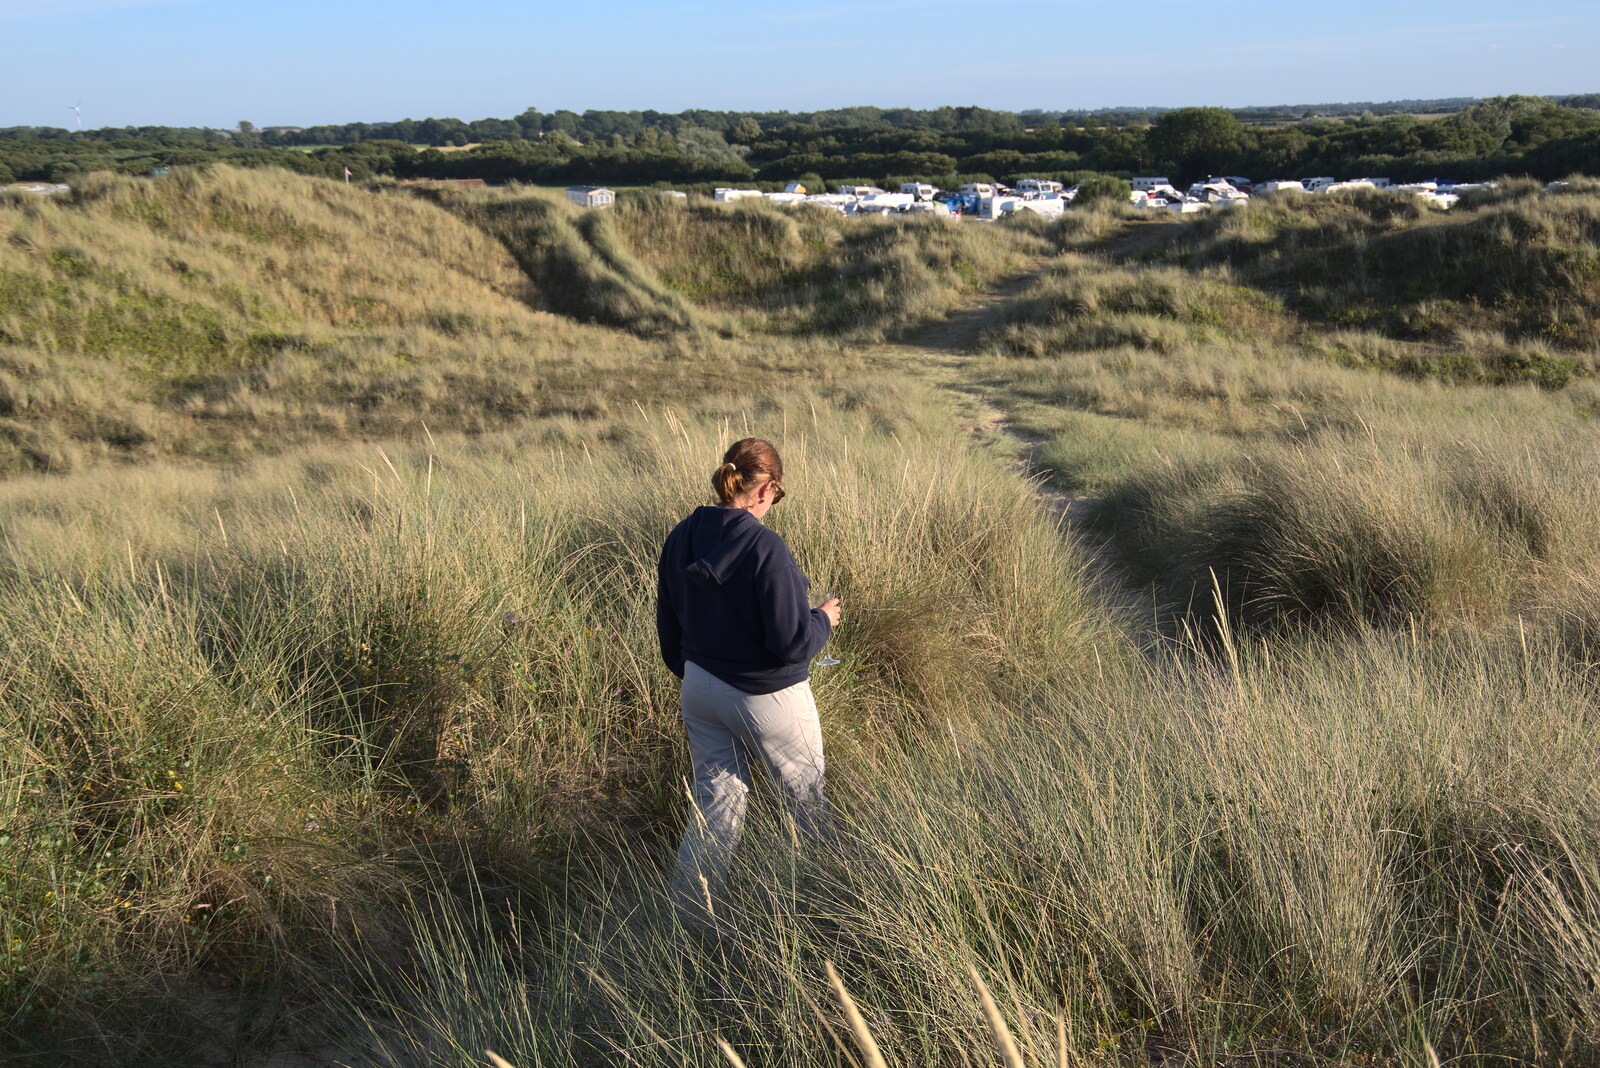 We wander around in the dunes from Camping in the Dunes, Waxham Sands, Norfolk - 9th July 2022